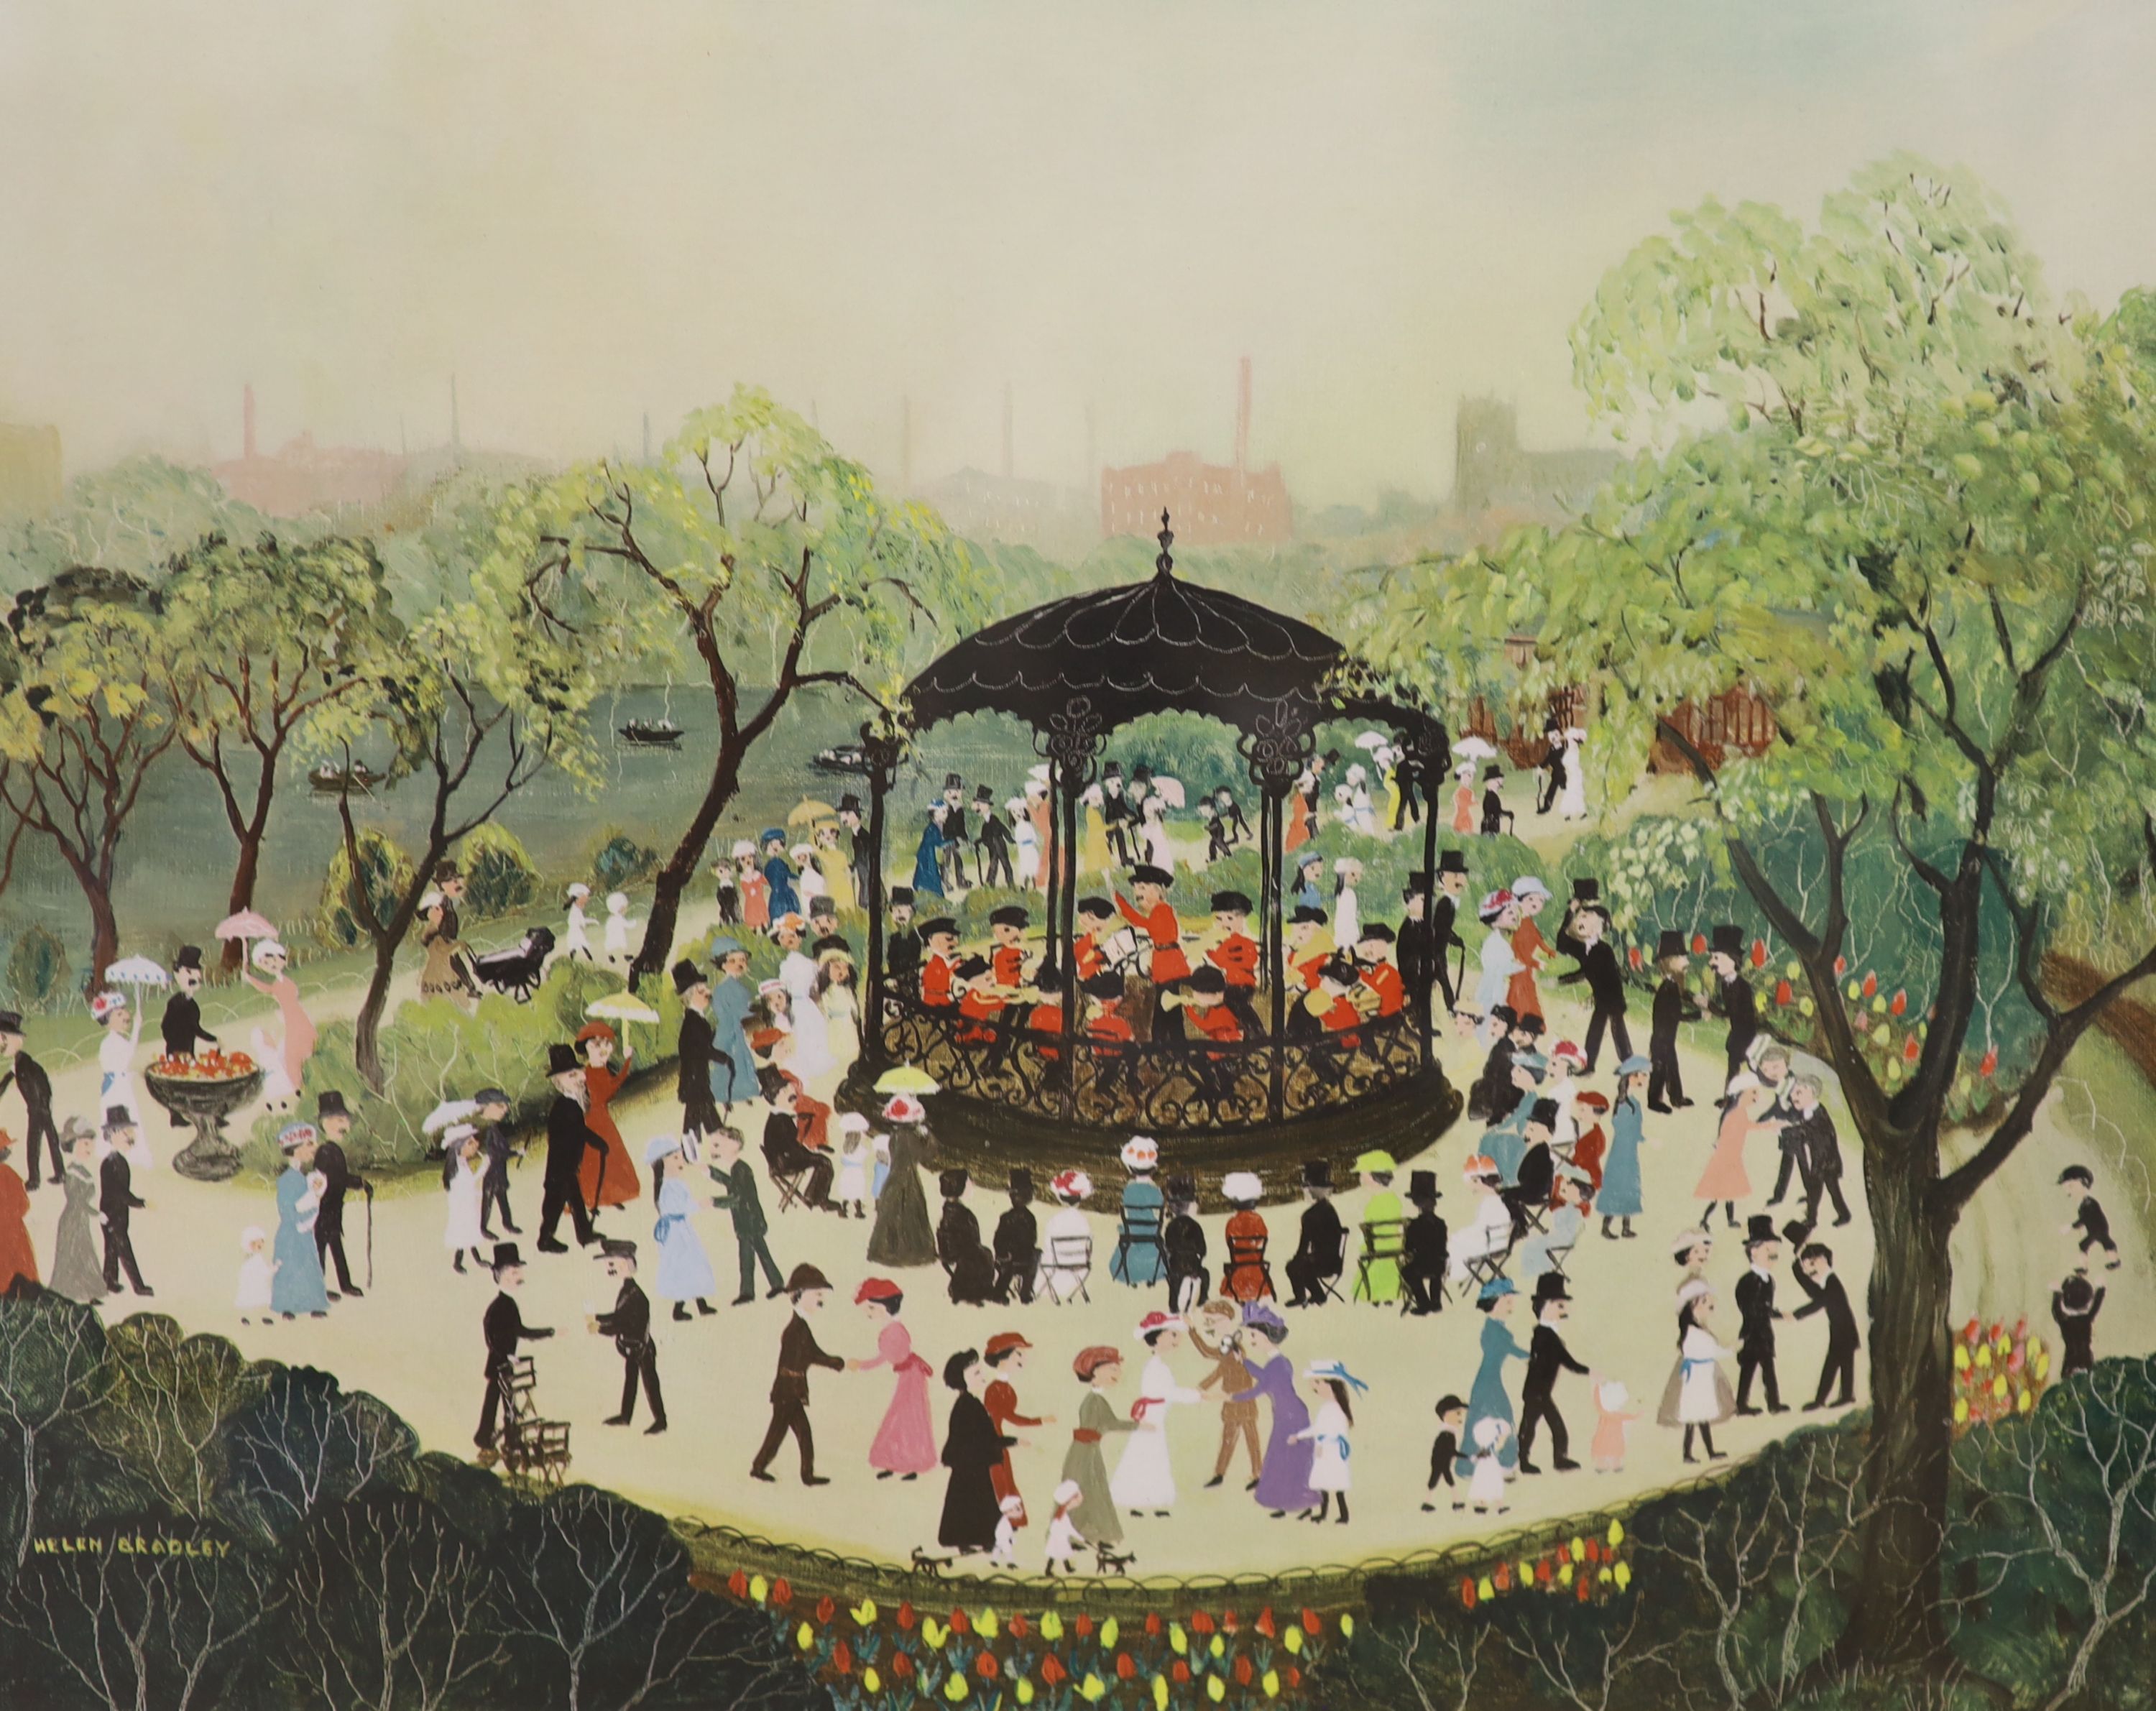 Helen Bradley, two signed prints, 'Evening on the Promenade' and 'Sunday Afternoon in Alexandra Park', both signed in pencil, 47 x 60cm and 43 x 52cm